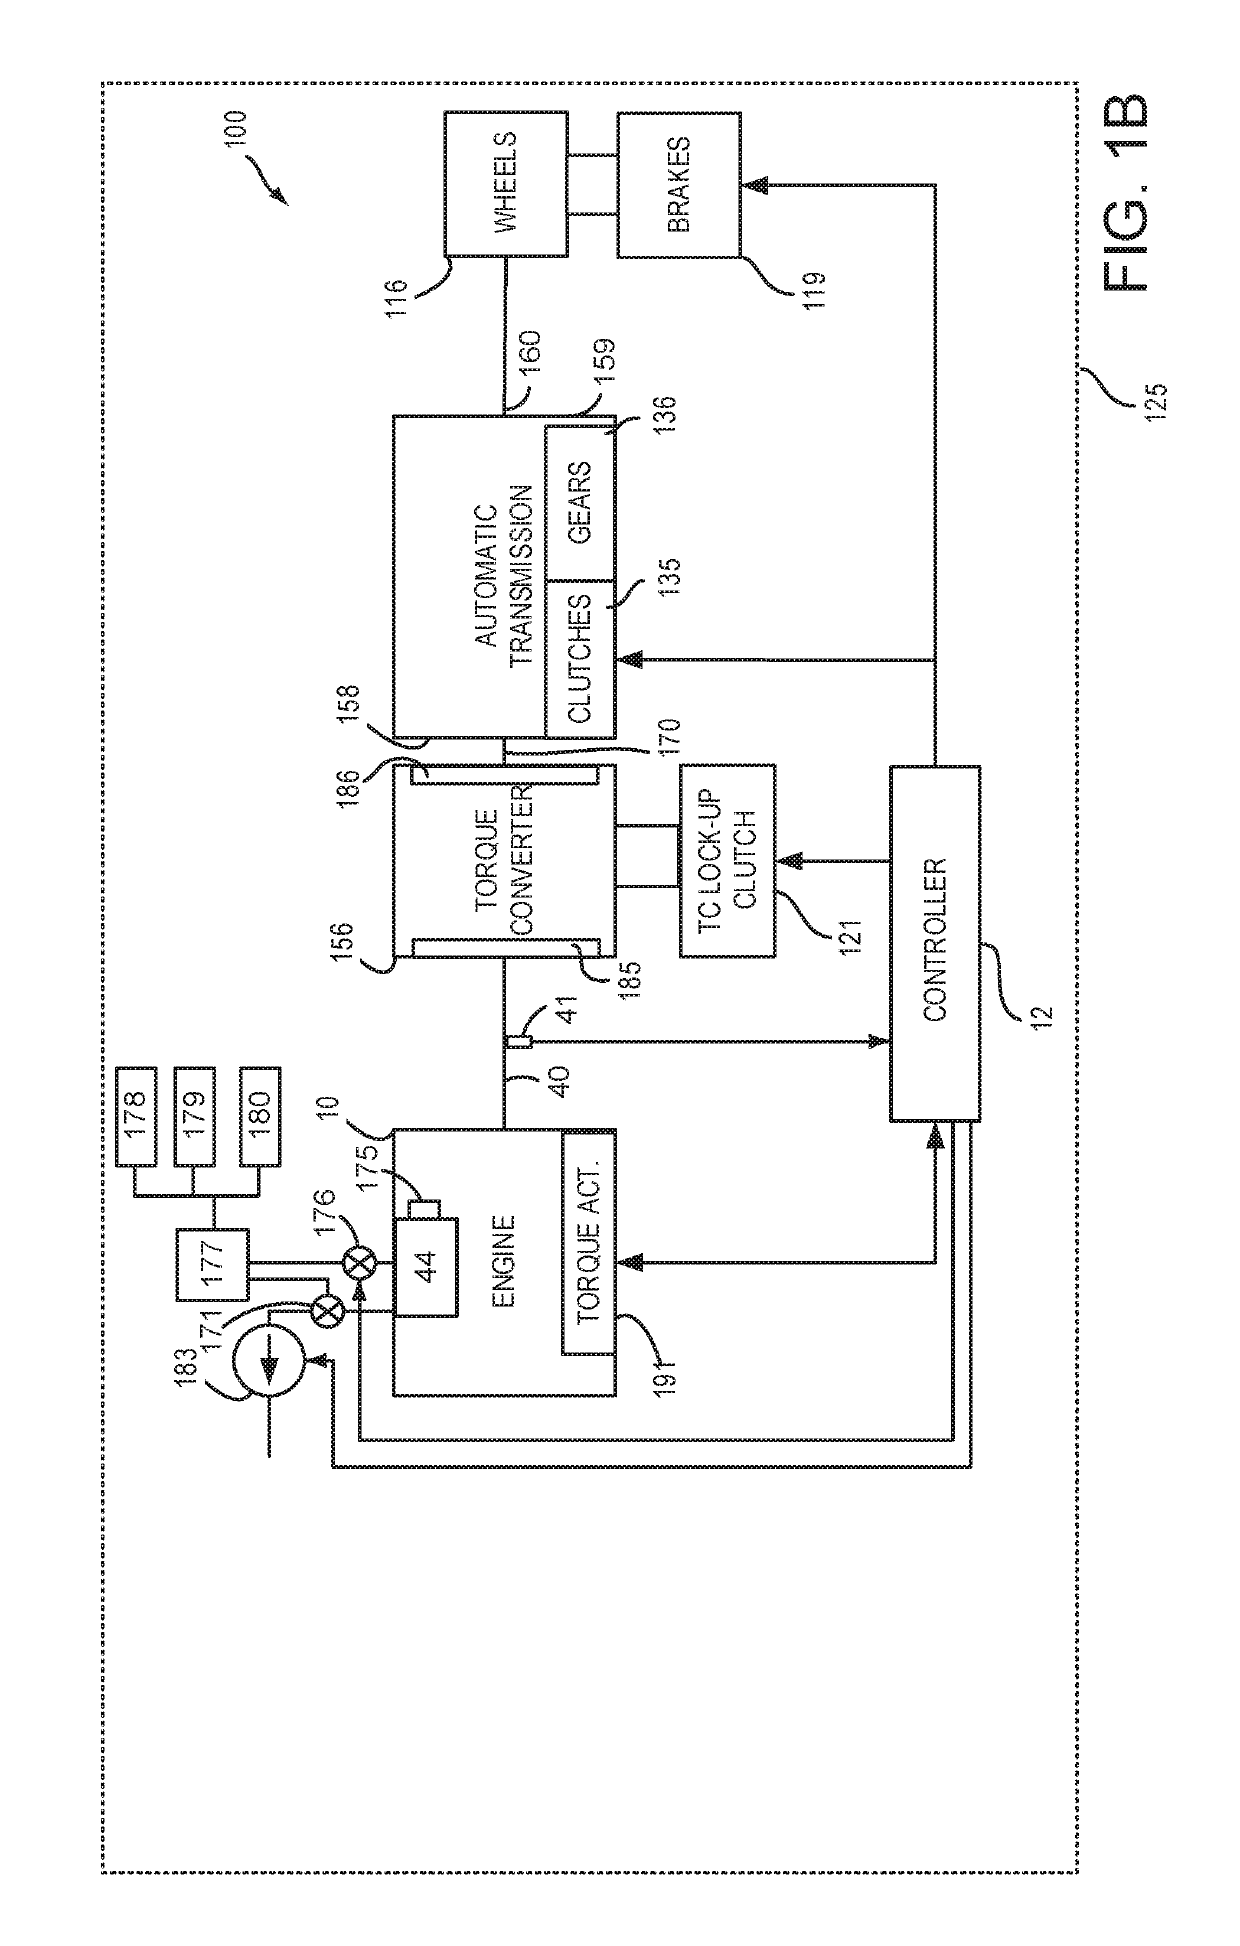 System and method for controlling fuel for reactivating engine cylinders